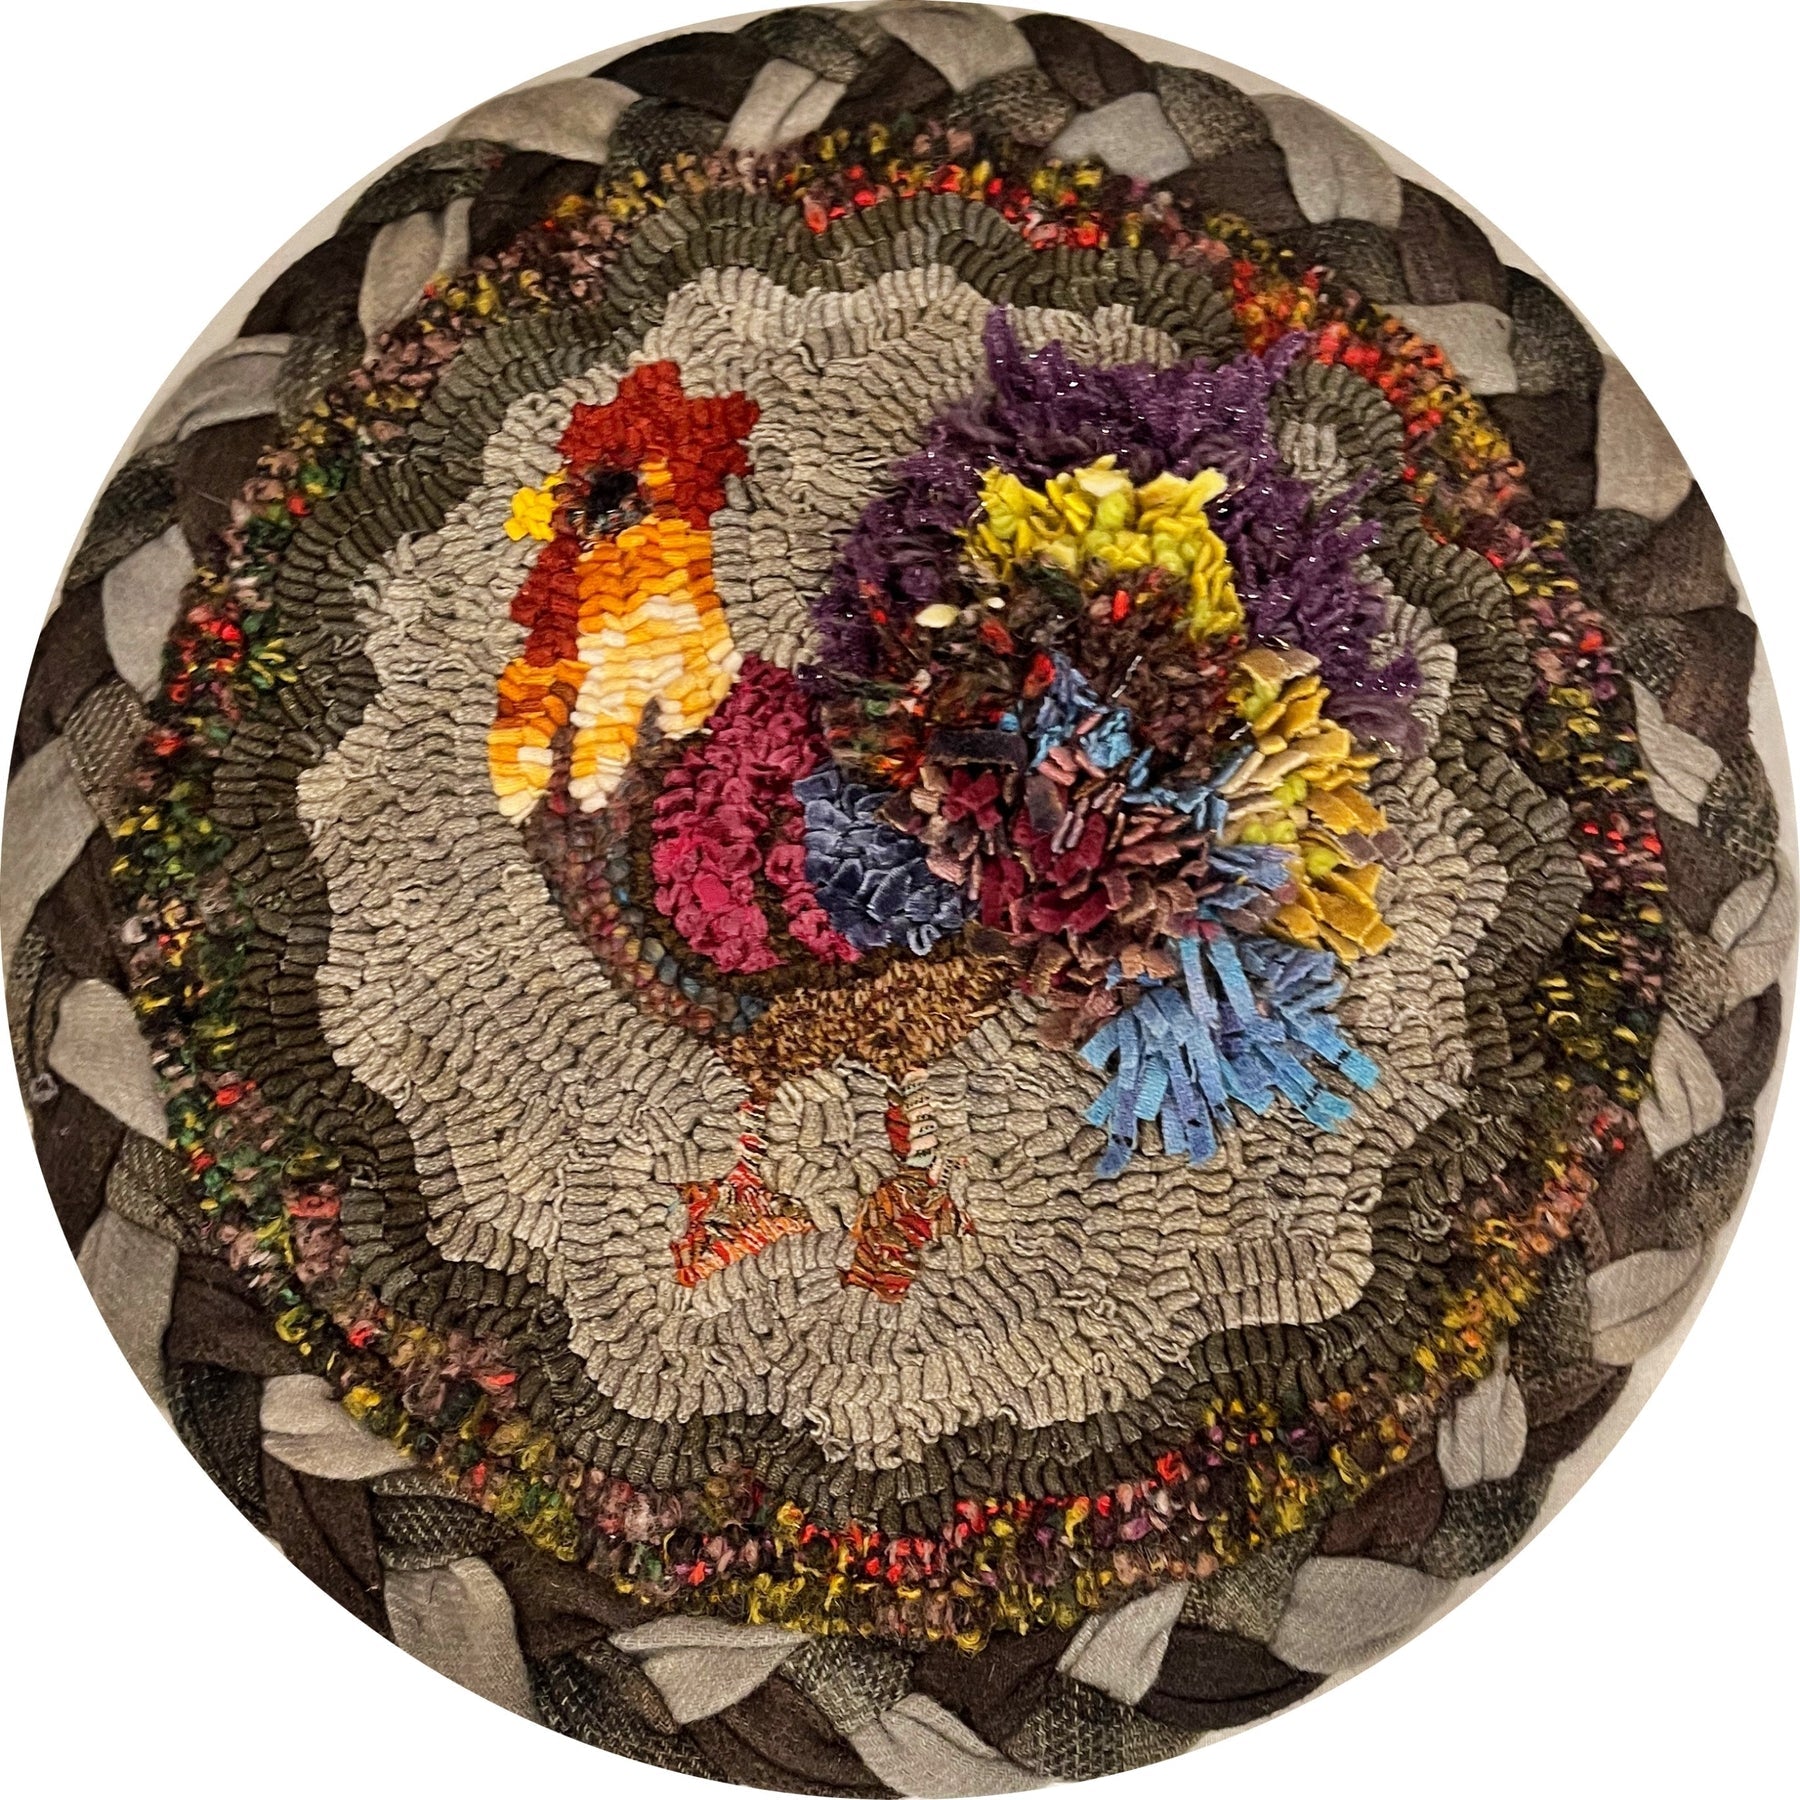 Rooster, rug hooked by Gail Ramierz